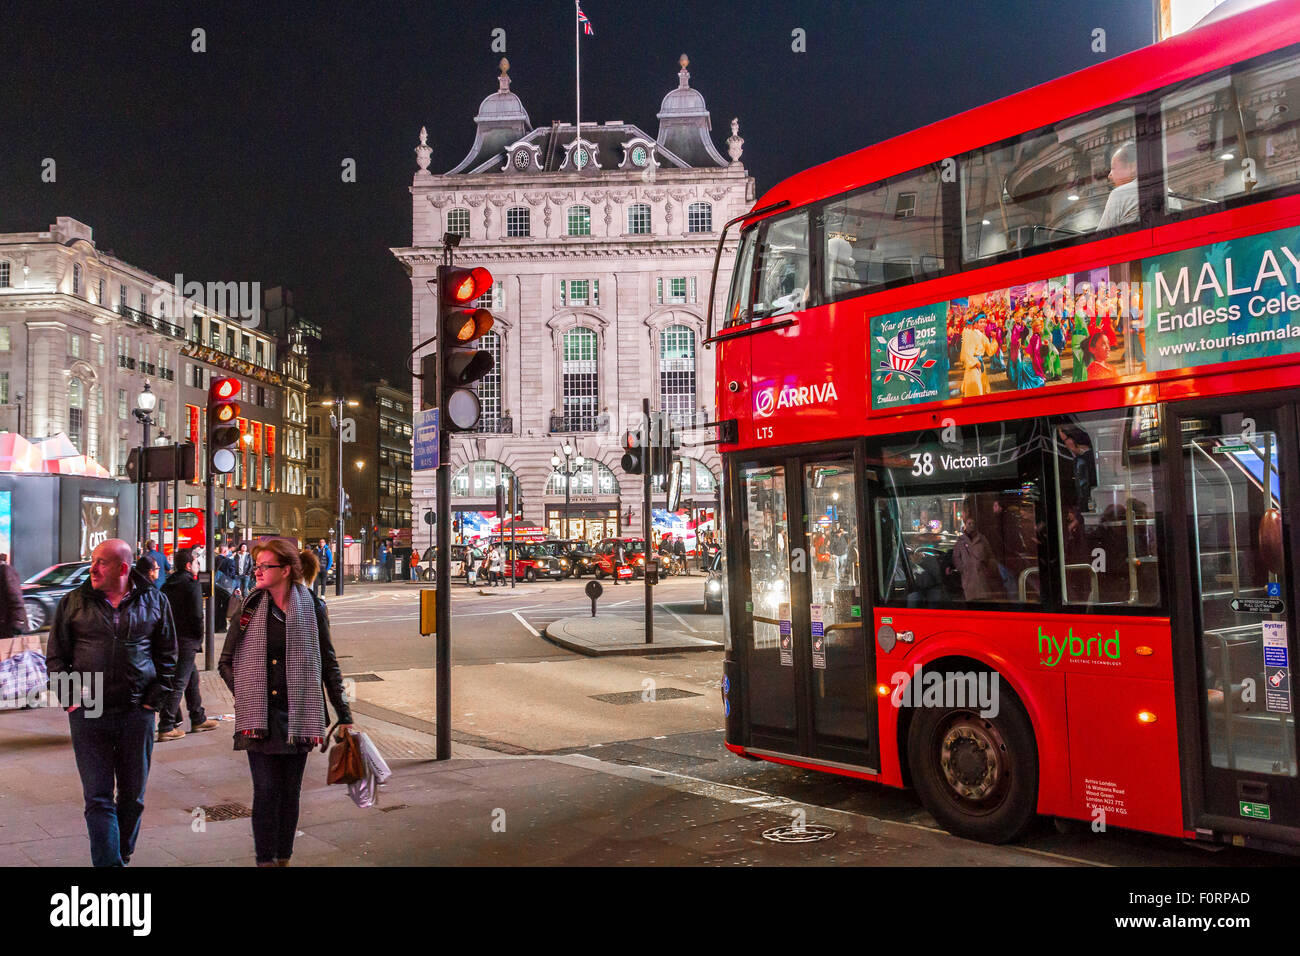 No 38 London Bus Approaching Piccadilly Circus, at Night , London Stock Photo